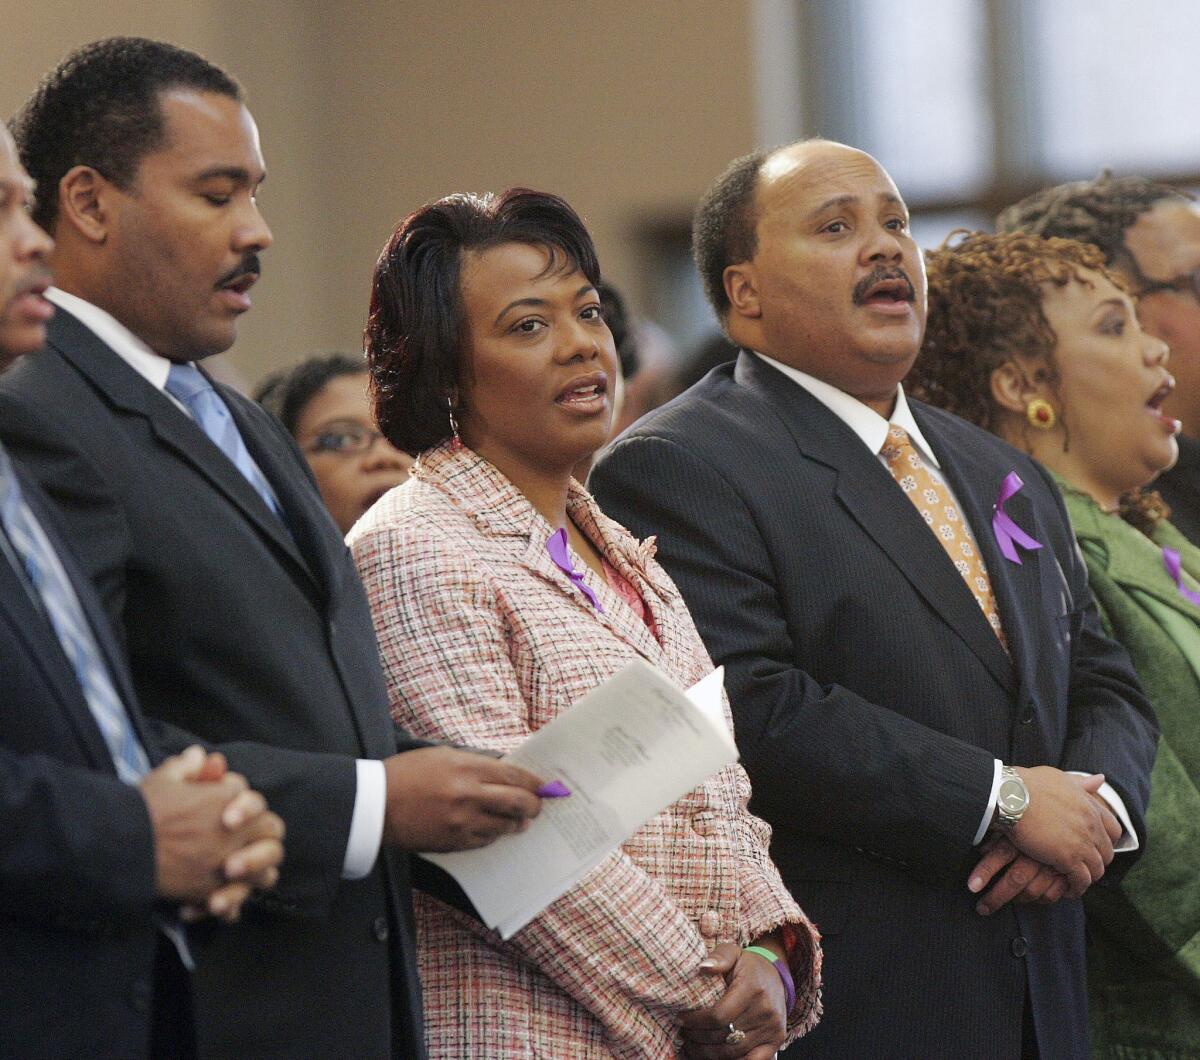 Dexter King, left, Bernice King and Martin Luther King III, shown at a 2006 tribute to their mother, Coretta Scott King, are now in a court dispute over the Bible and Nobel Peace Prize belonging to their father, Martin Luther King Jr.